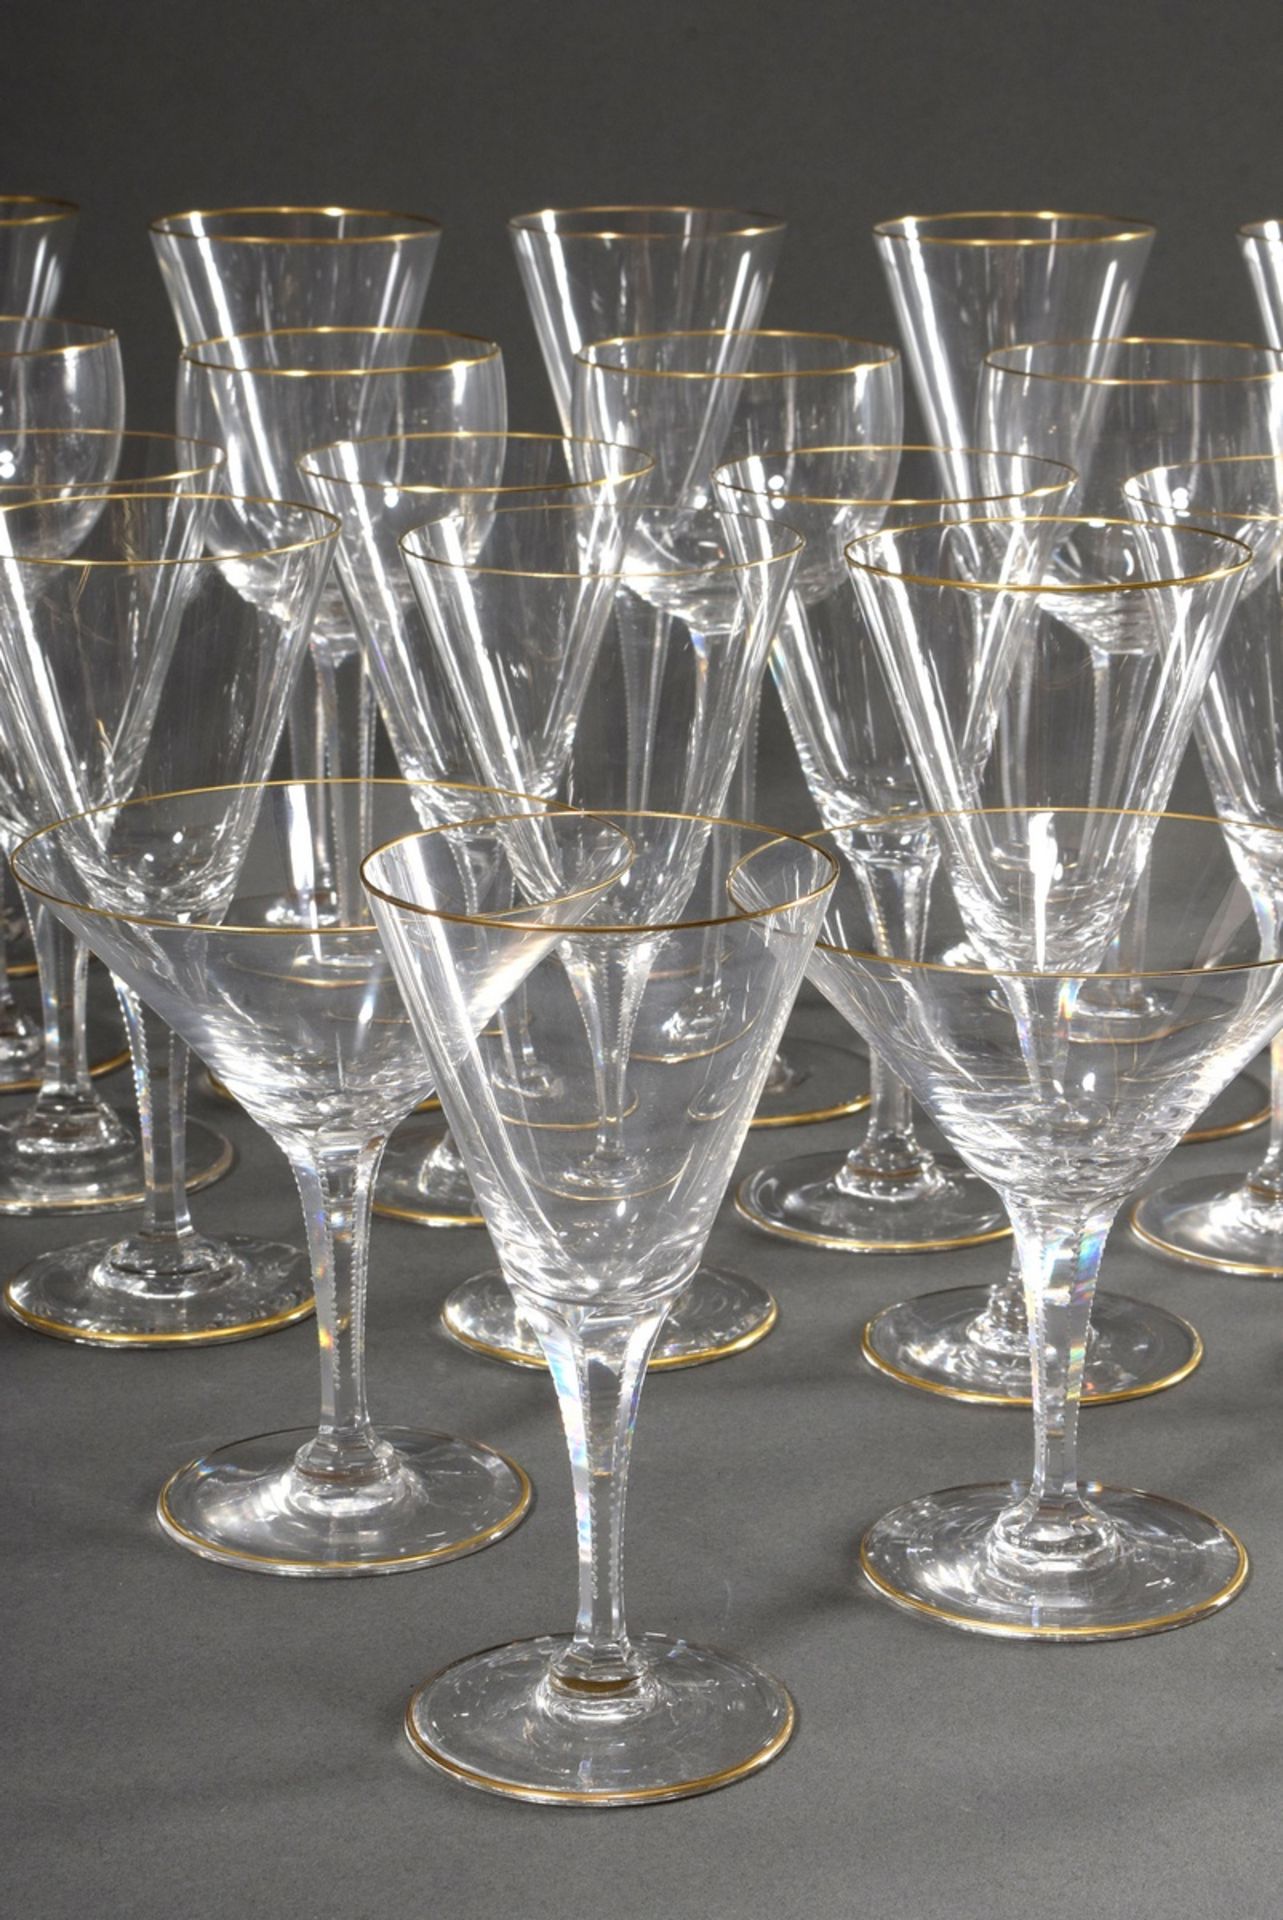 41 pieces drinking set with faceted stem, pointed goblet form, notched cut and delicate gold rim, c